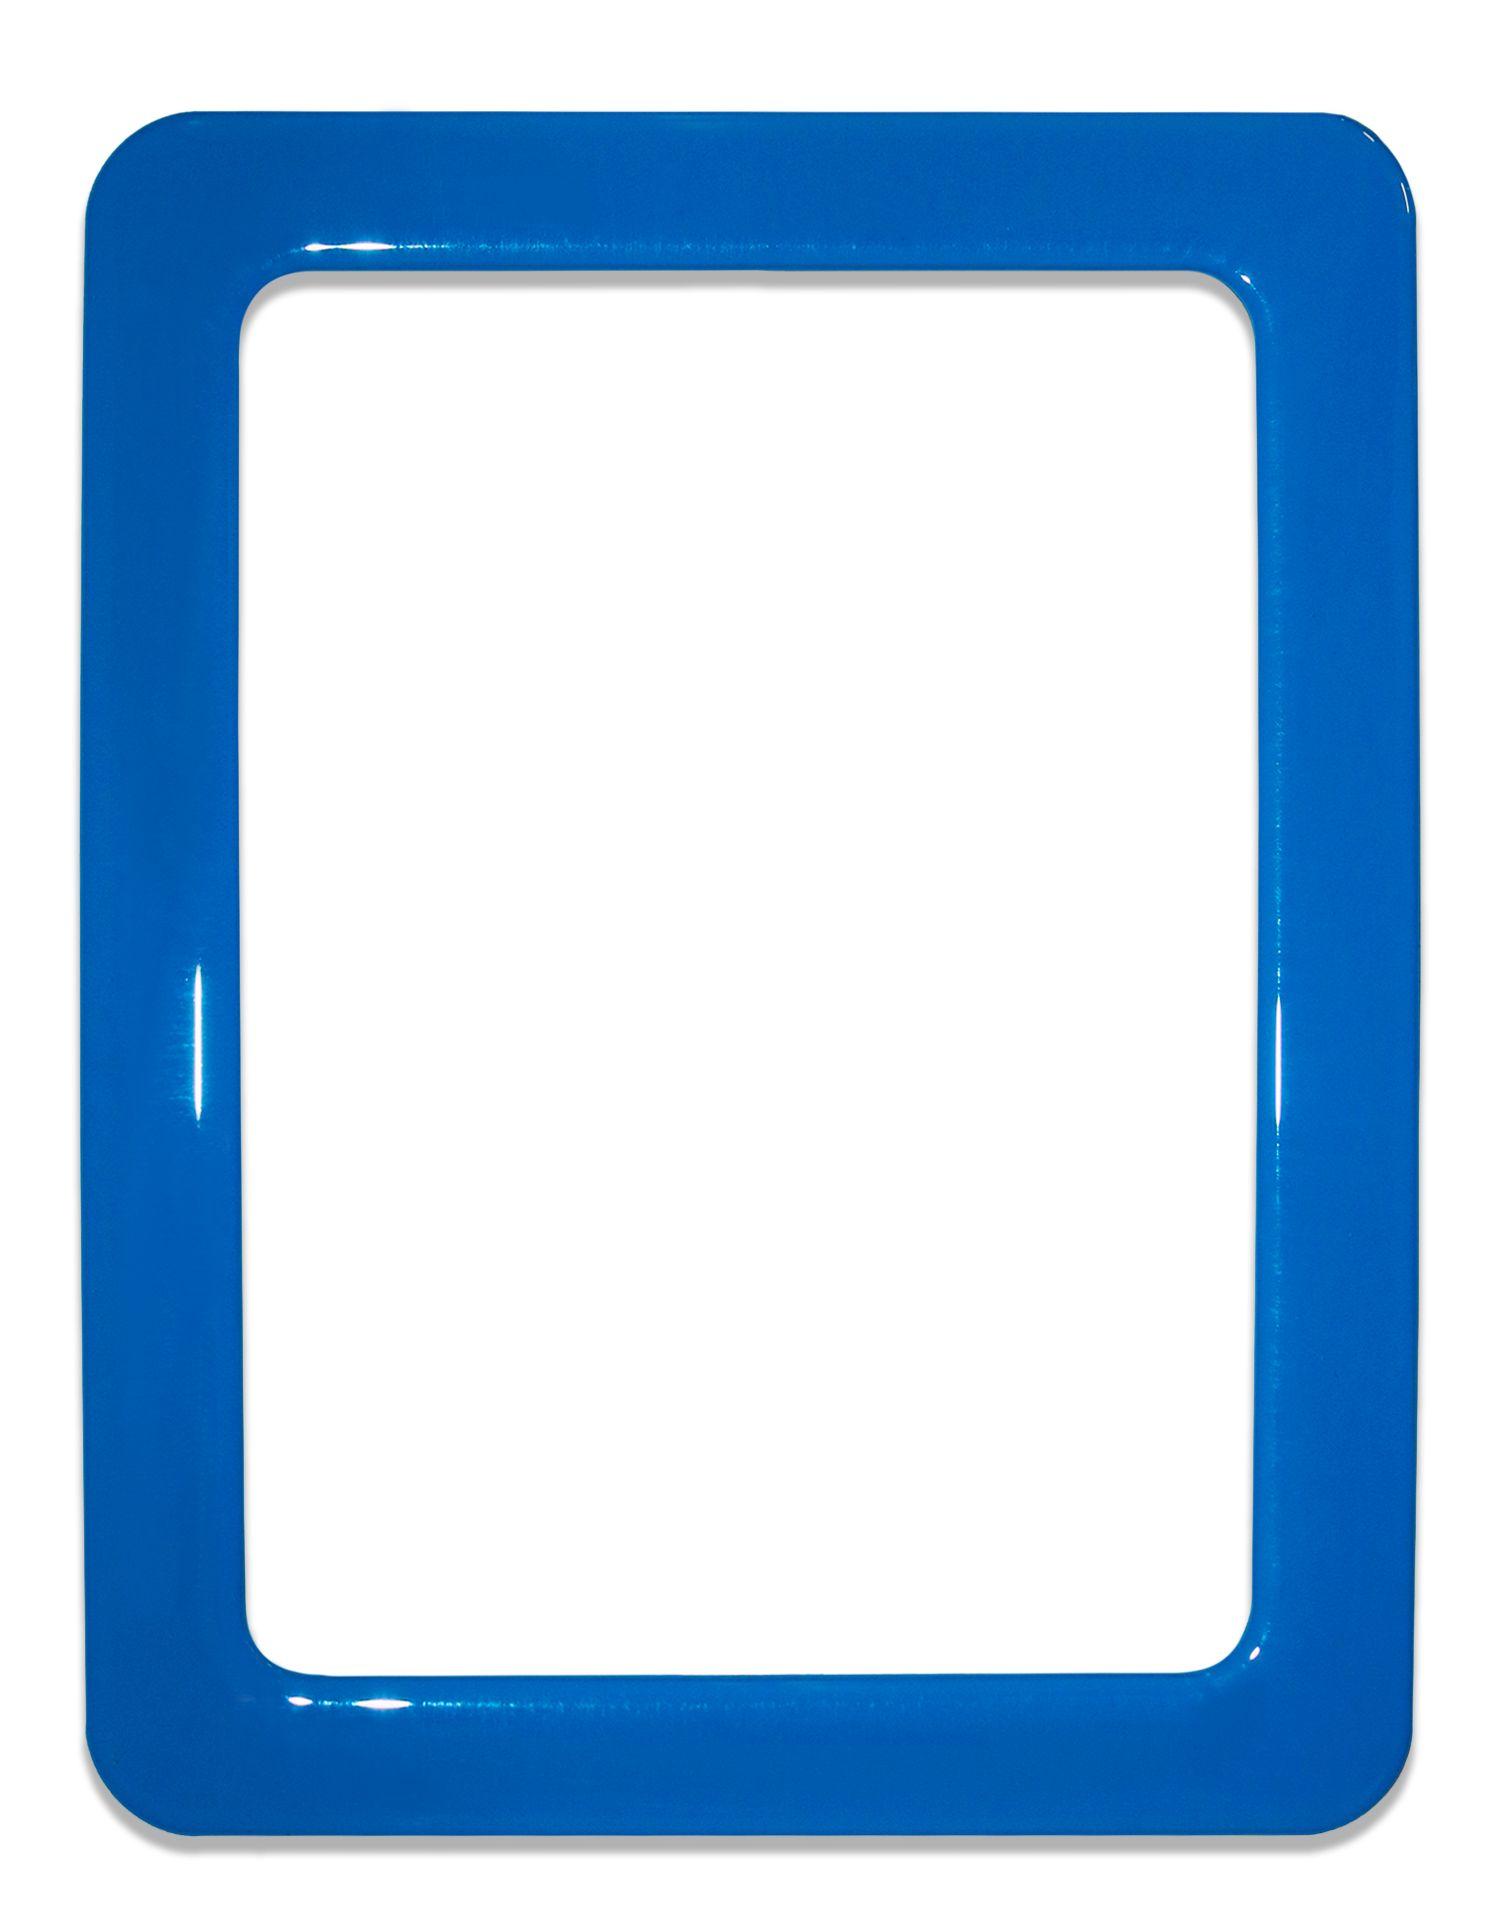 Magnetic self-adhesive frame size 16.0x11.8cm - blue